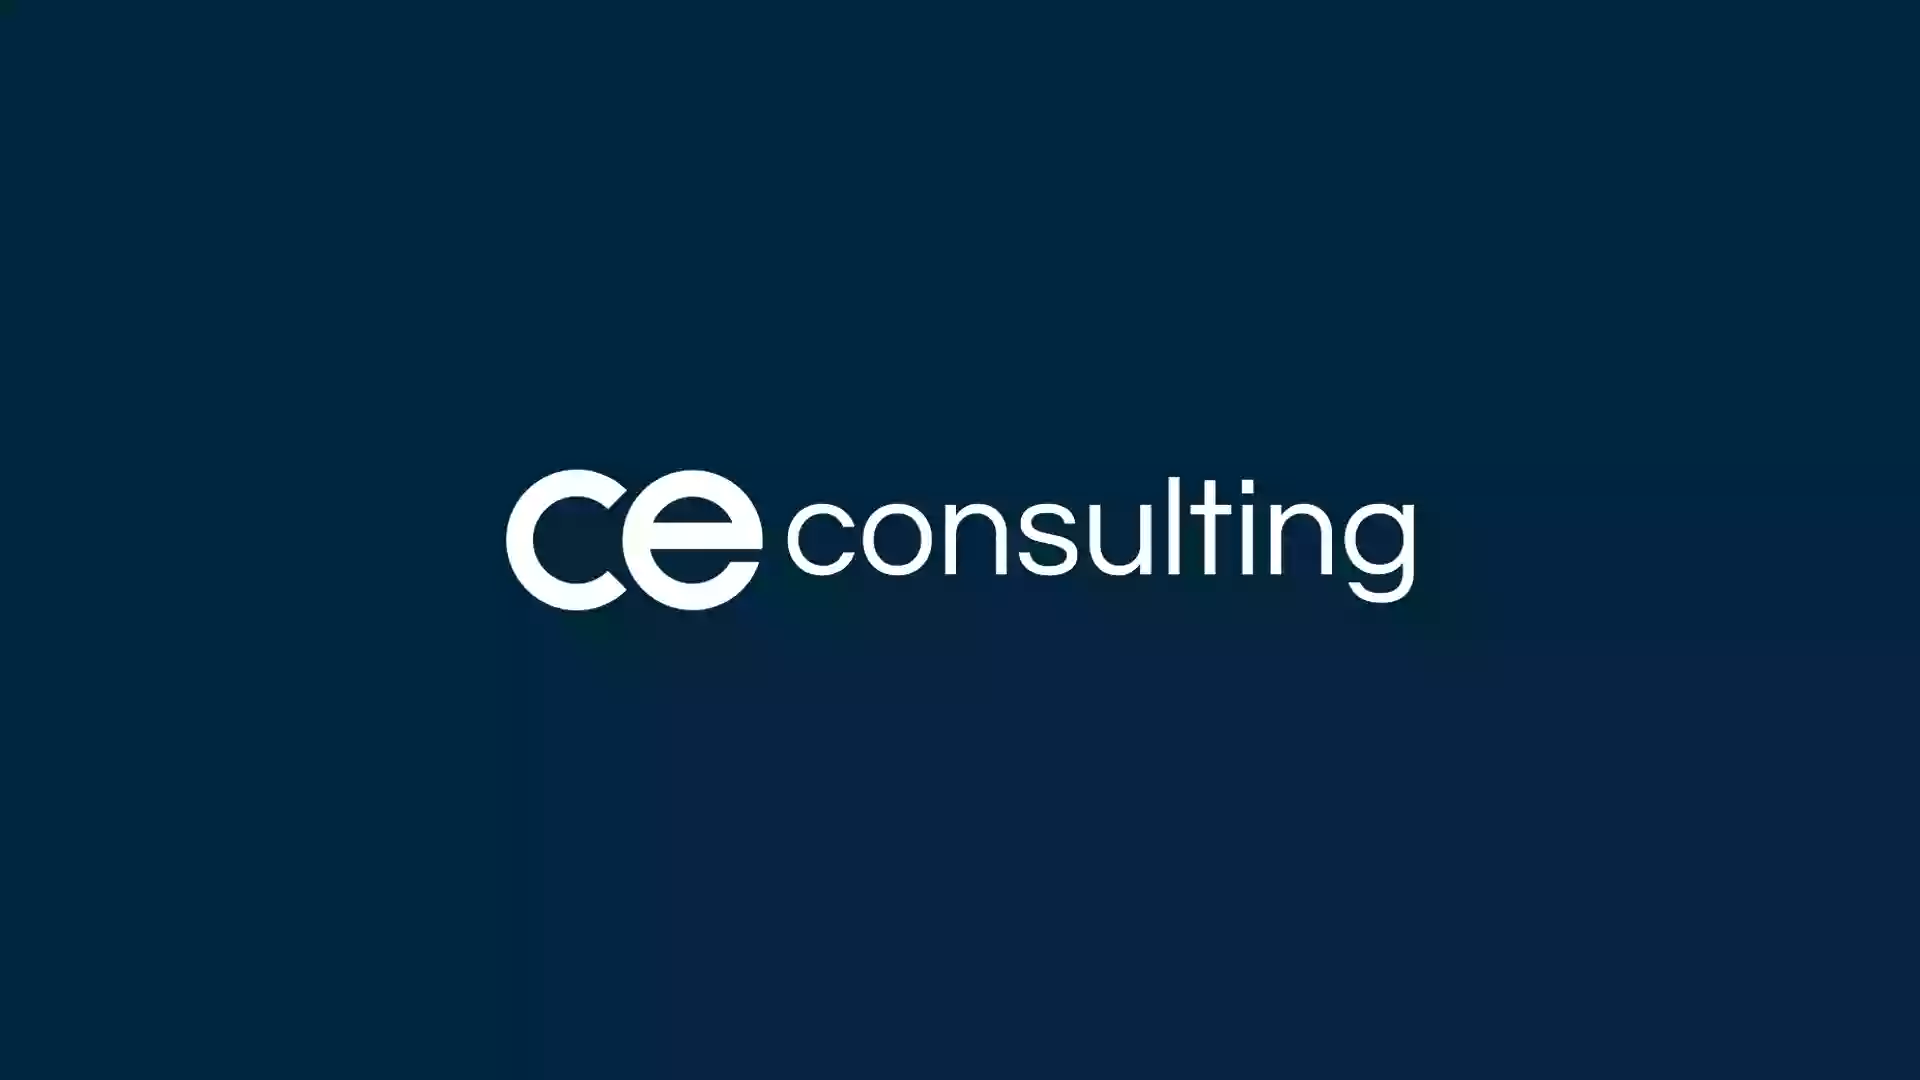 CE CONSULTING EMPRESARIAL